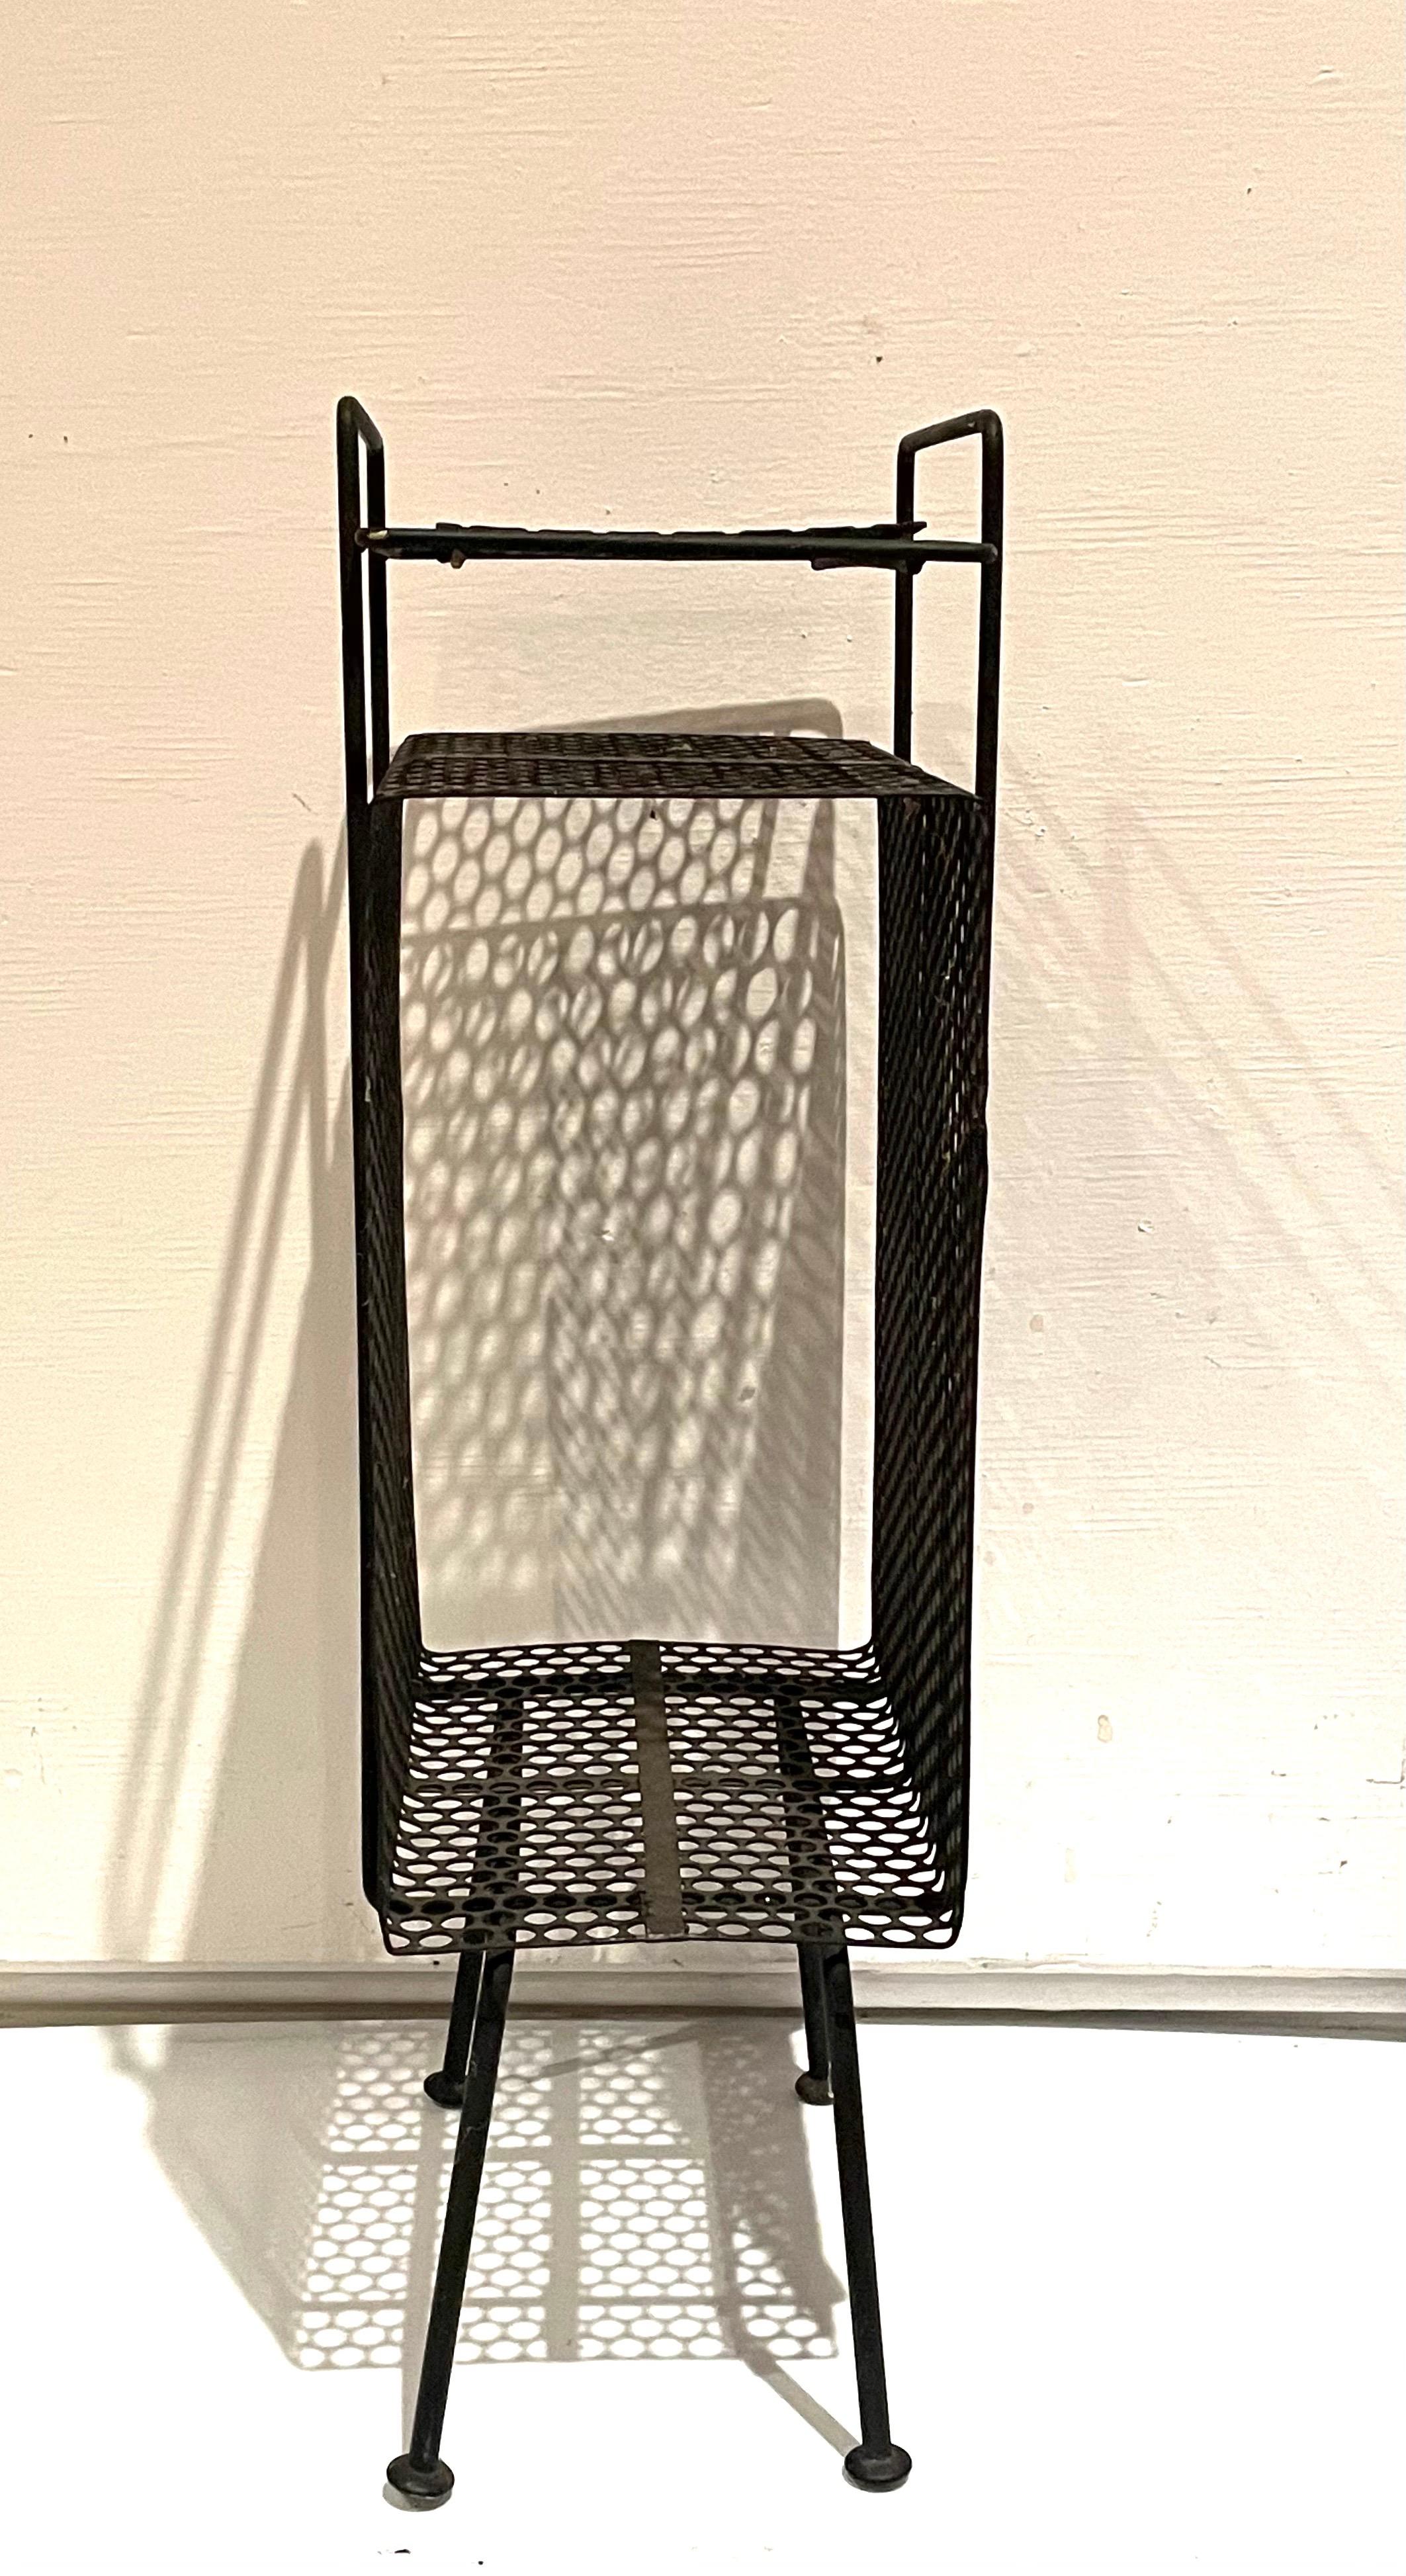 The 1950s Classic midcentury, atomic age era stand/rack original used for the telephone, phone directory, this one its in black finish with some wear light rust and patina due to age. Designed by Richard Galef for Ravenware.